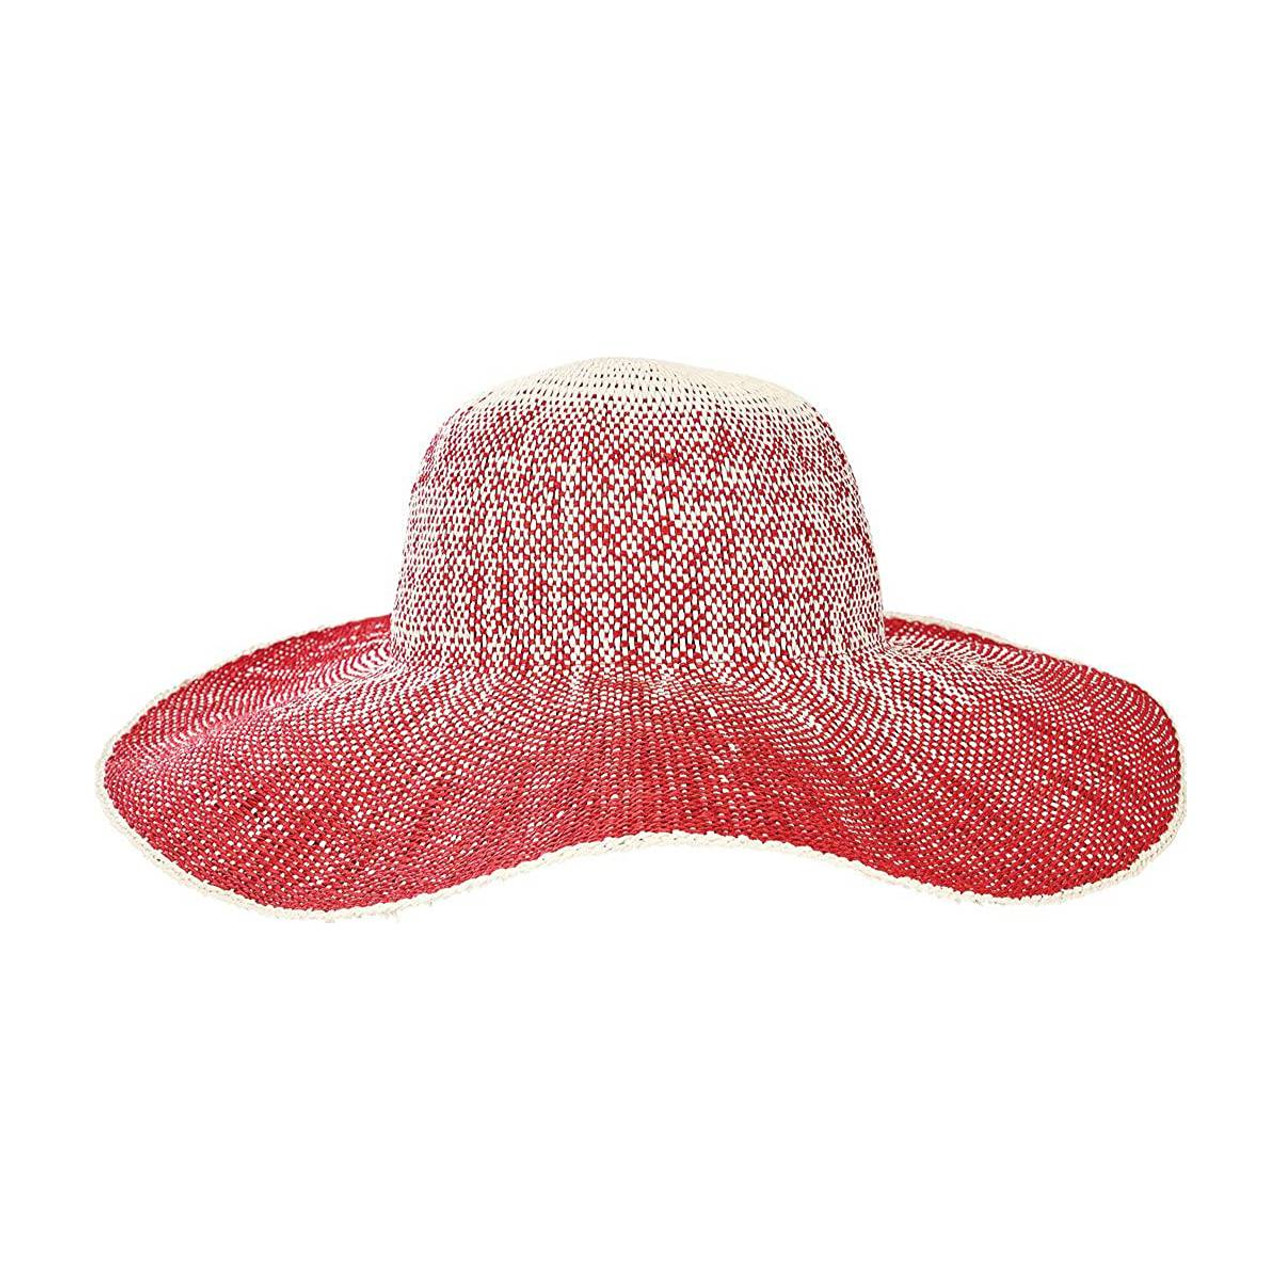 San Diego Hat Company Women's Ombre Floppy Sun Hat, Sunhat, Red